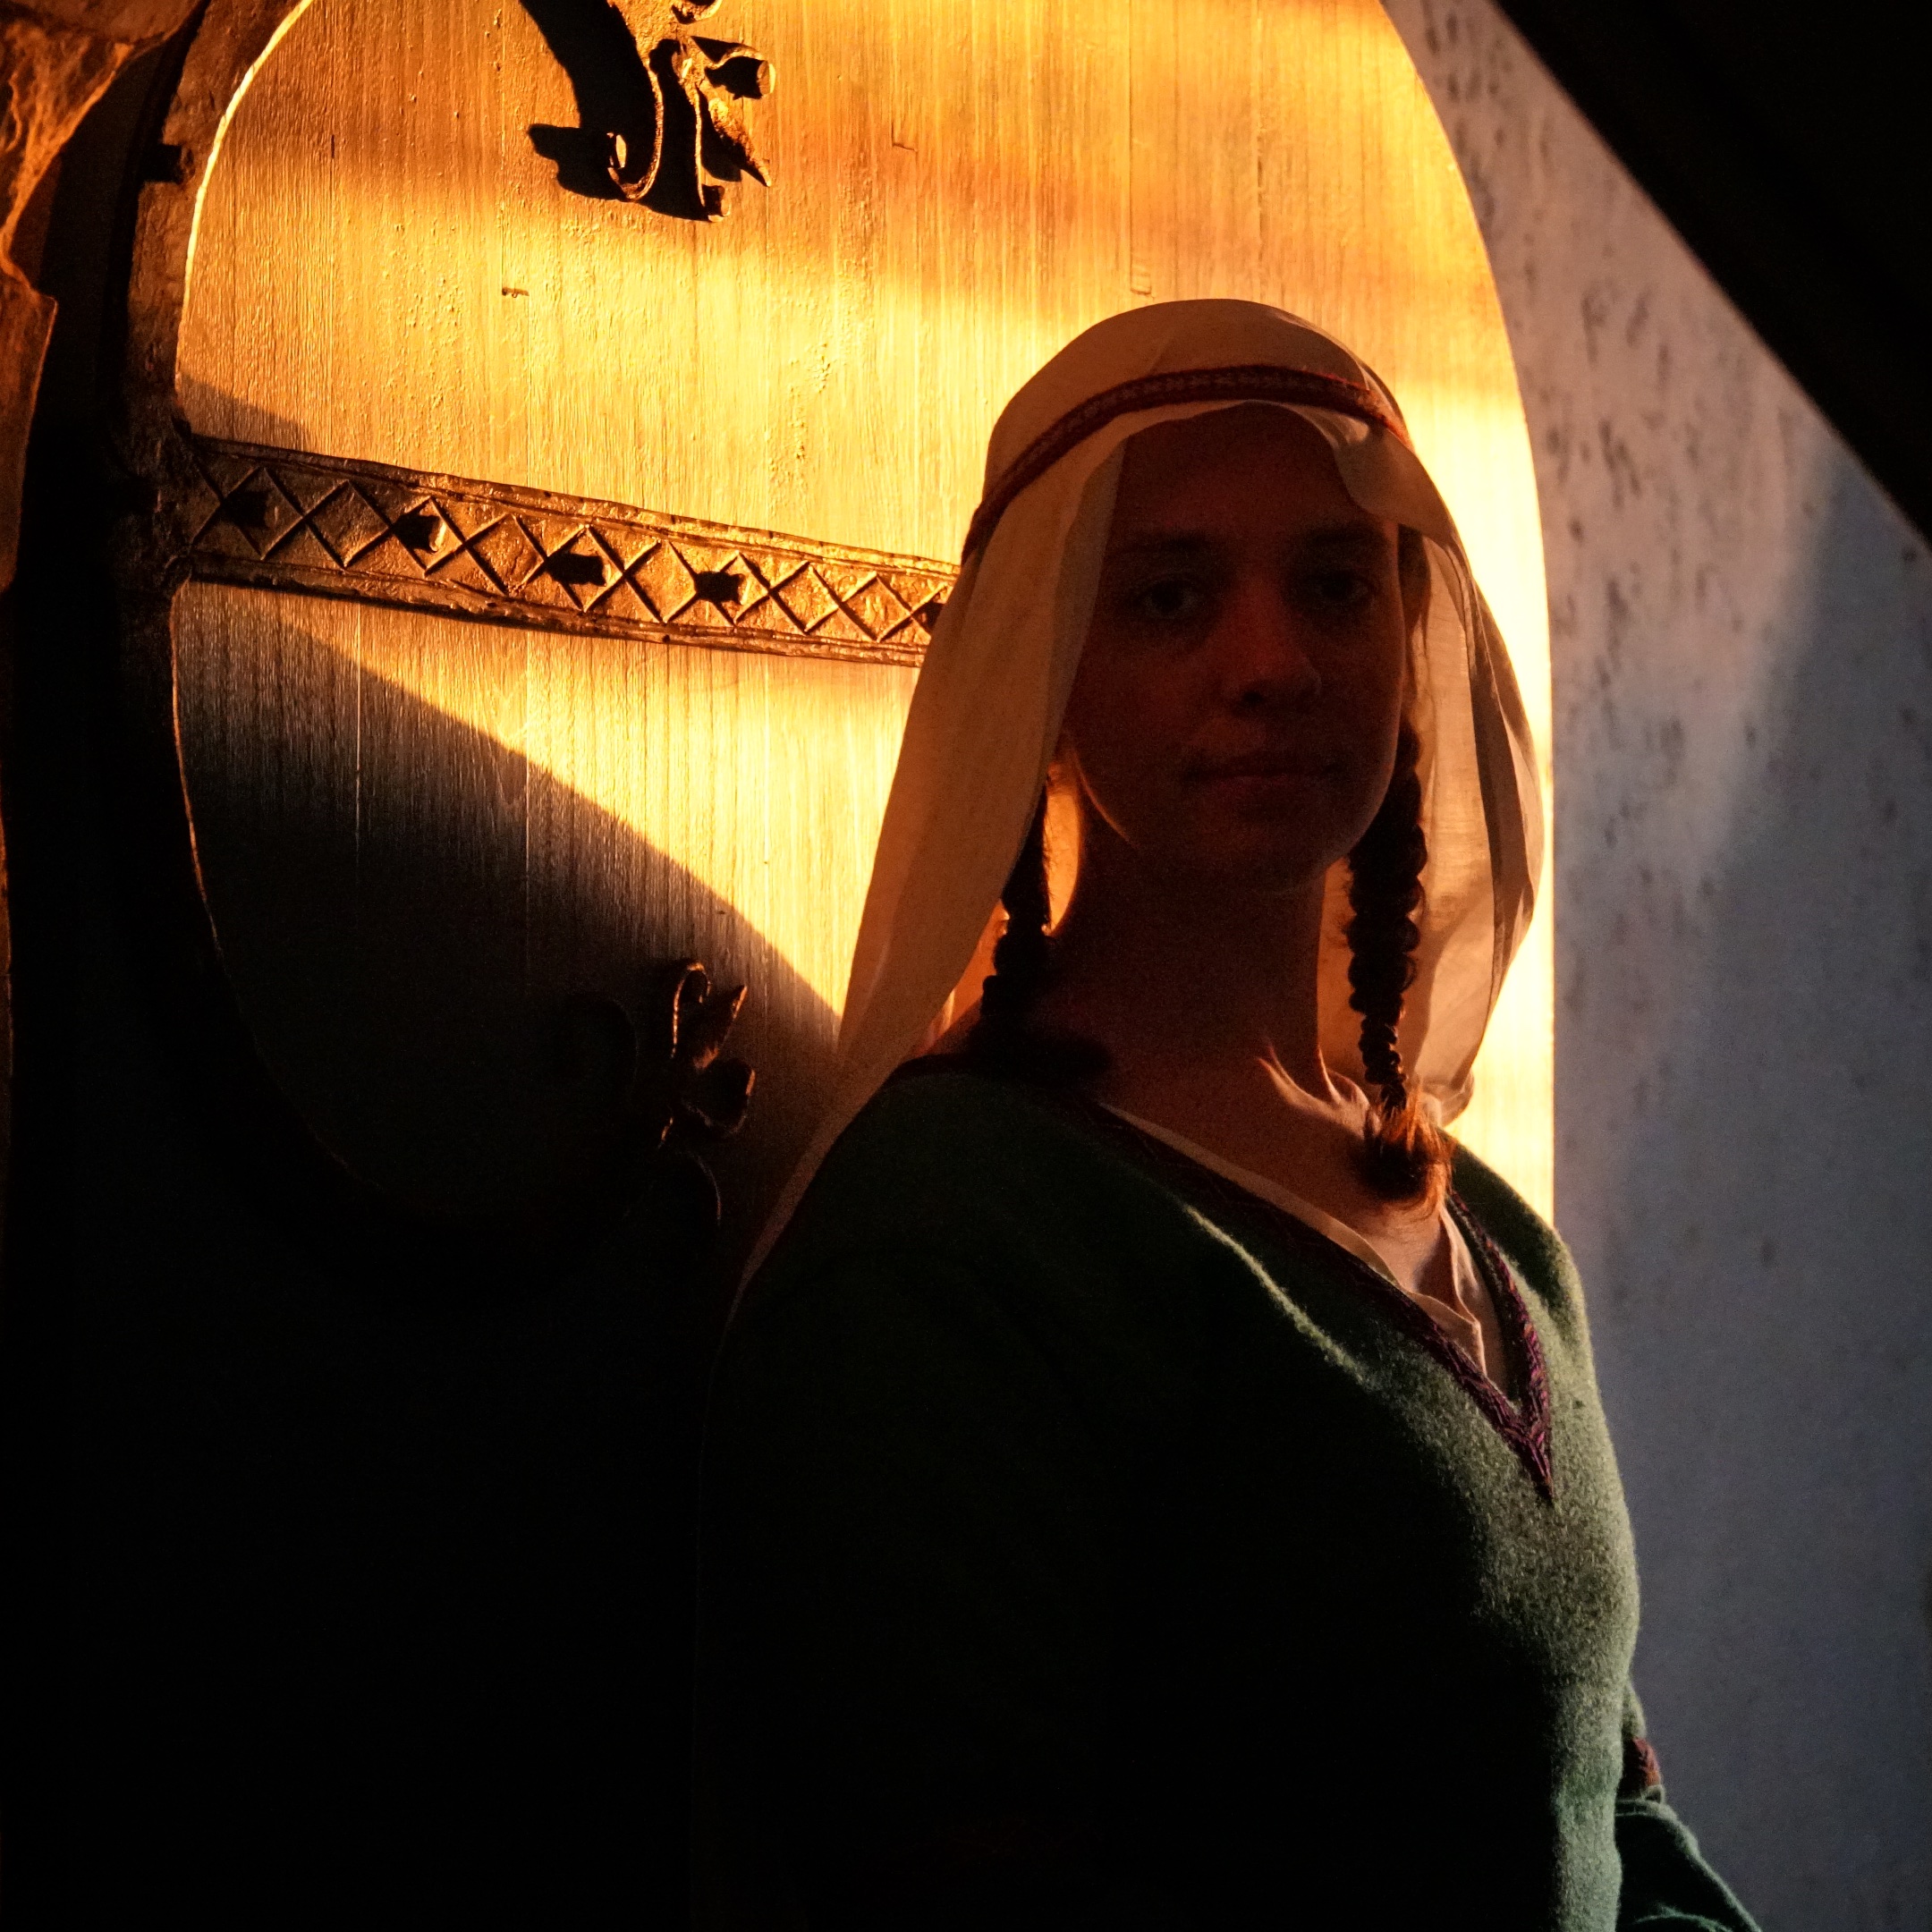 A high status medieval woman is silhouetted in the doorway of a castle by the setting sun